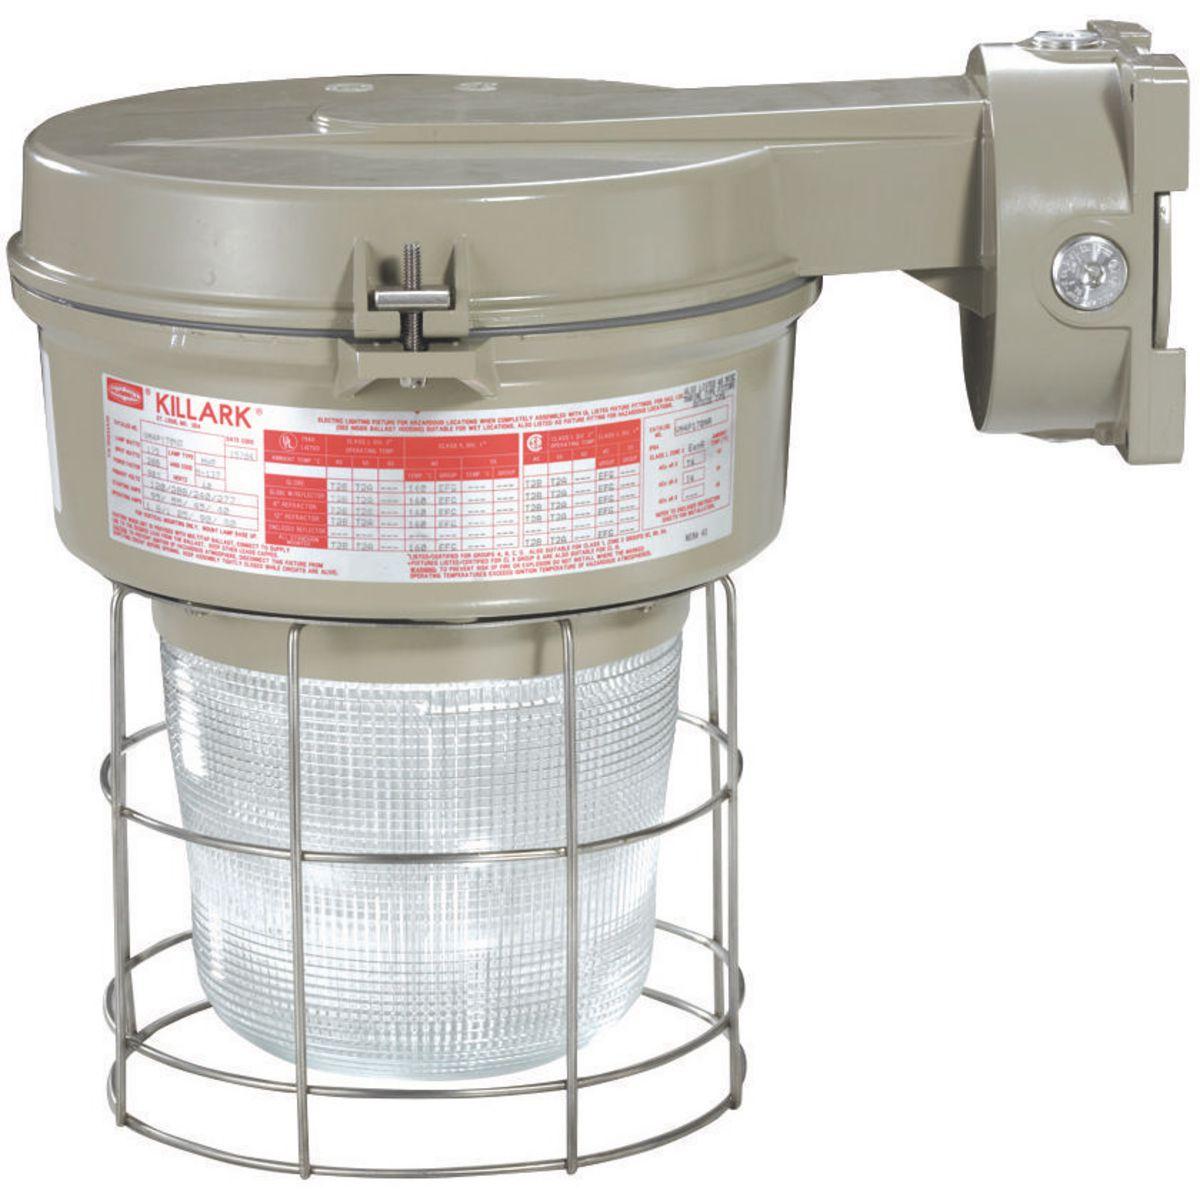 Hubbell VM4P170B2R5G VM4 Series - 175W Metal Halide Quadri-Volt - 3/4" Wall Mount - Type V Glass Refractor and Guard  ; Ballast tank and splice box – corrosion resistant copper-free aluminum alloy with baked powder epoxy/polyester finish, electrostatically applied for complet